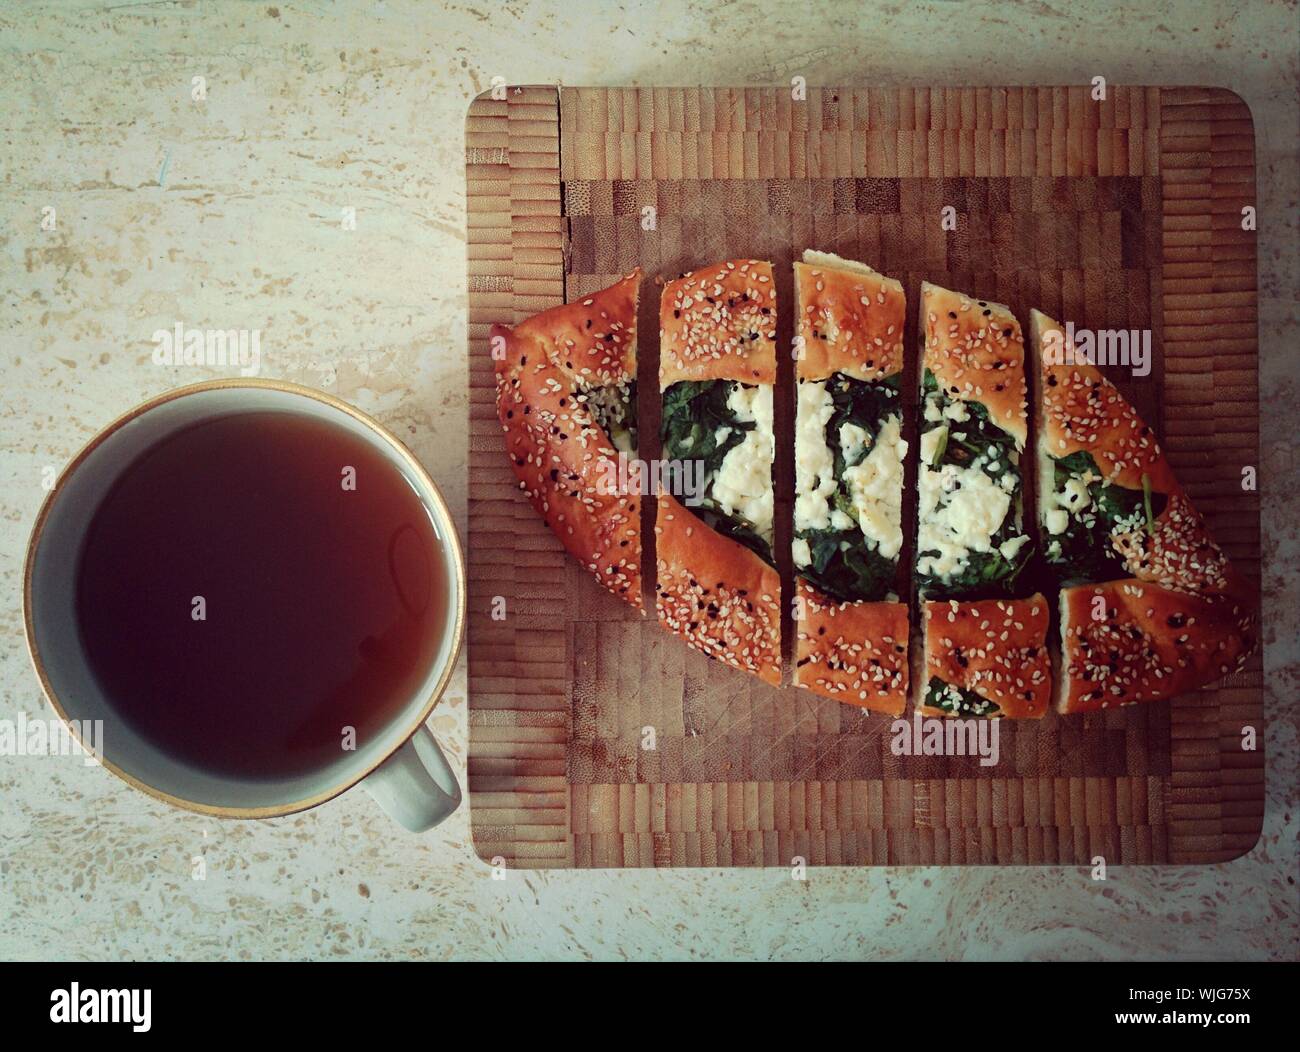 Directly Above Shot Of Black Tea And Pide Served On Table Stock Photo